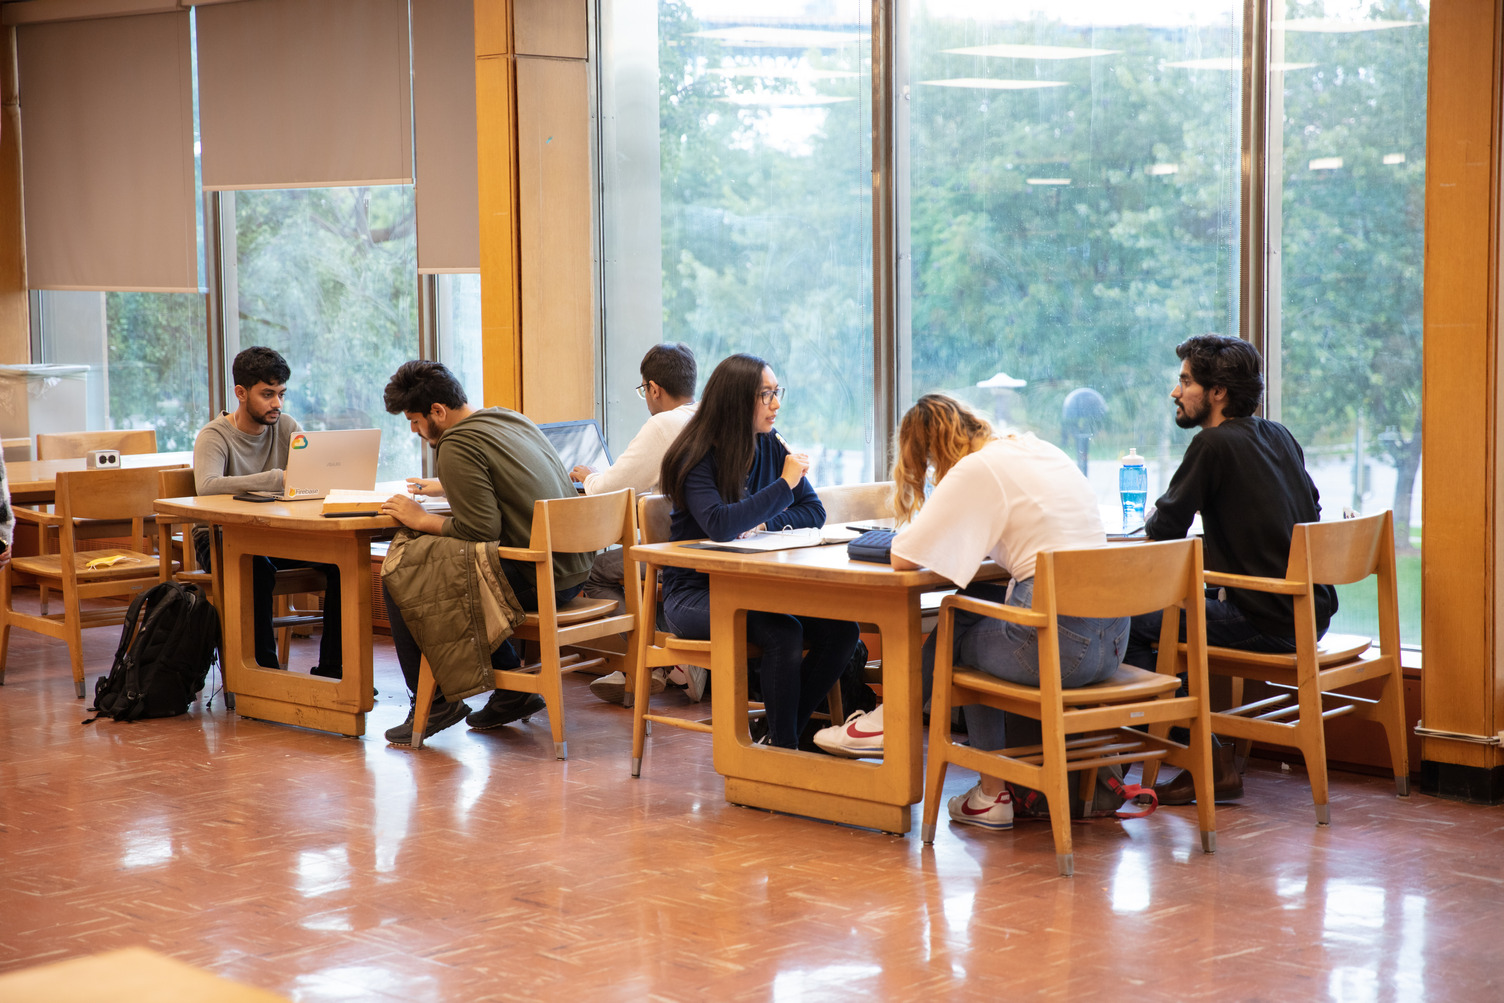 A group of students sitting at a shared table